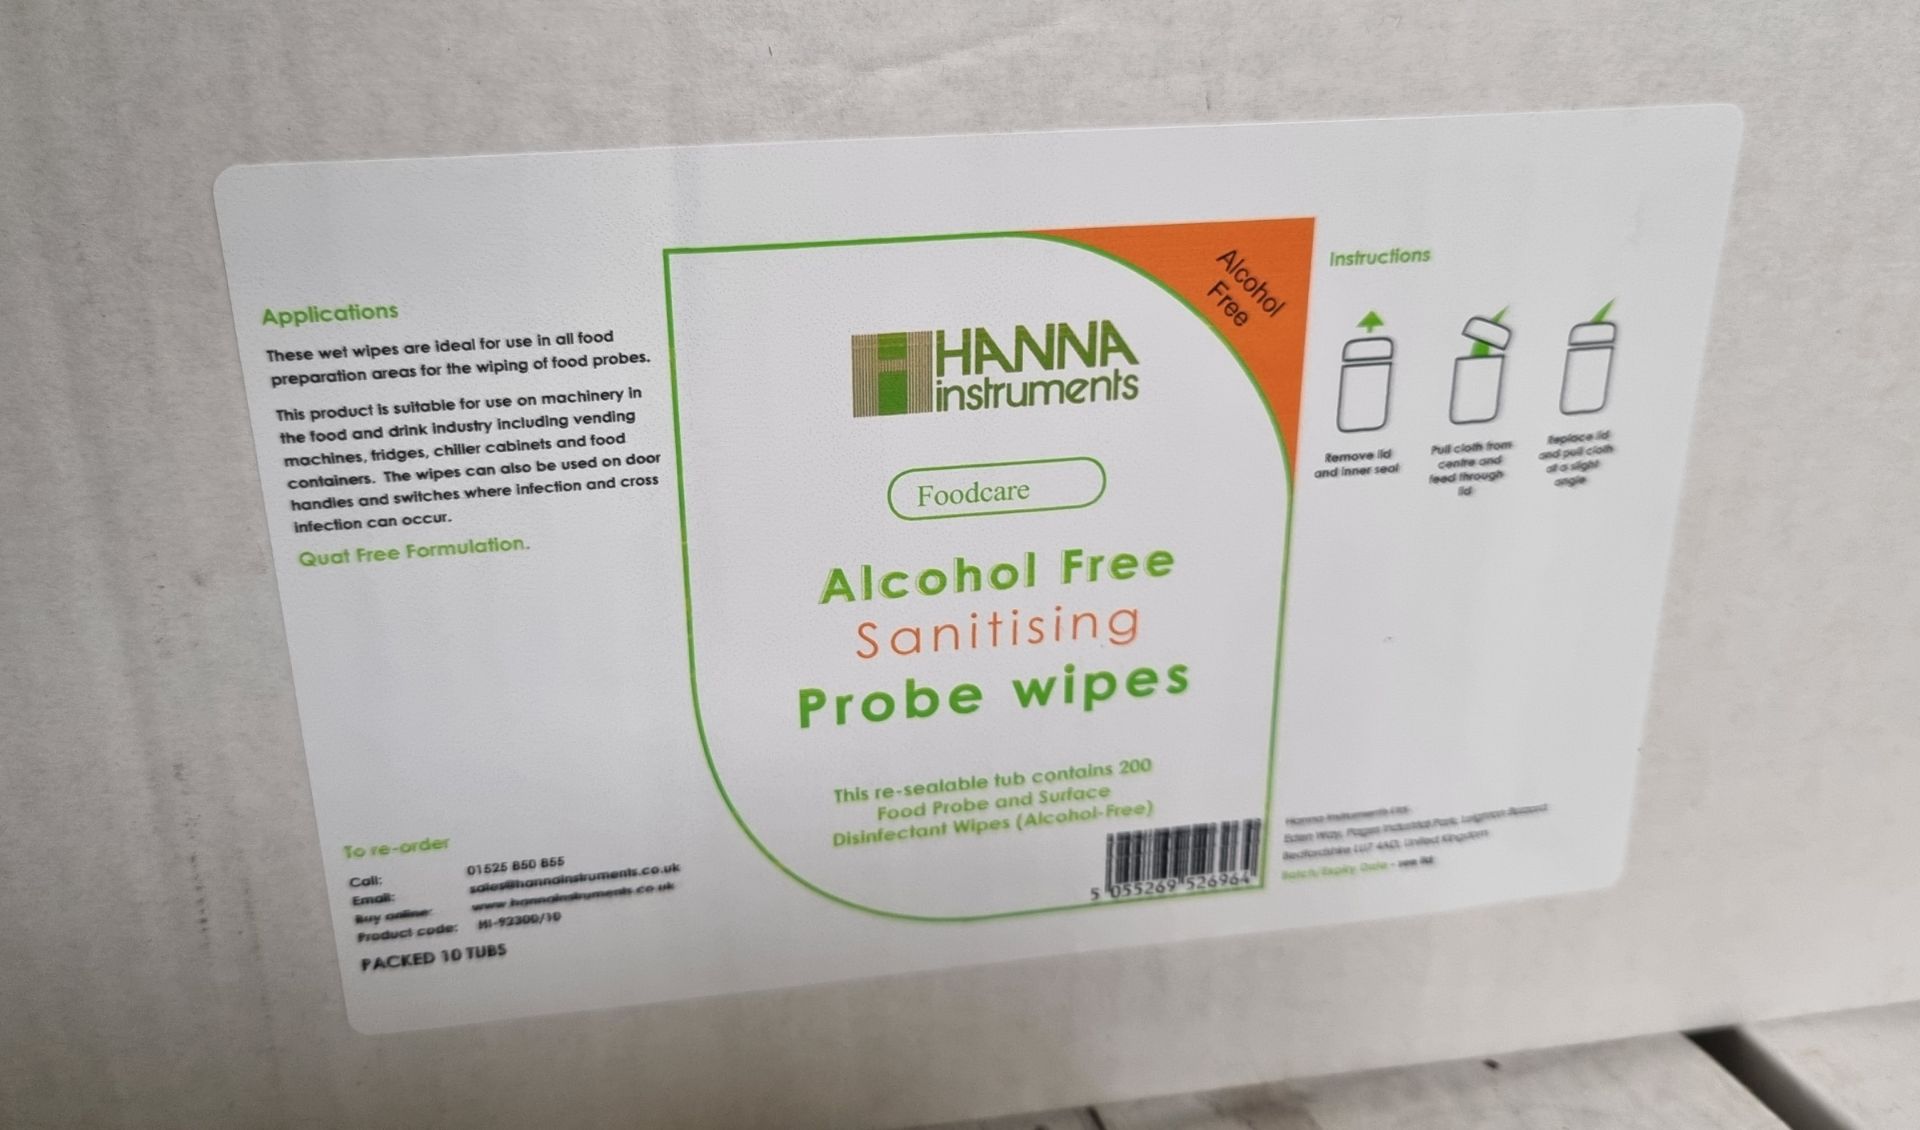 36x Boxes of Henna alcohol free wipes - probe wipes - 10x tubs per box (300 tubs) - Image 2 of 3